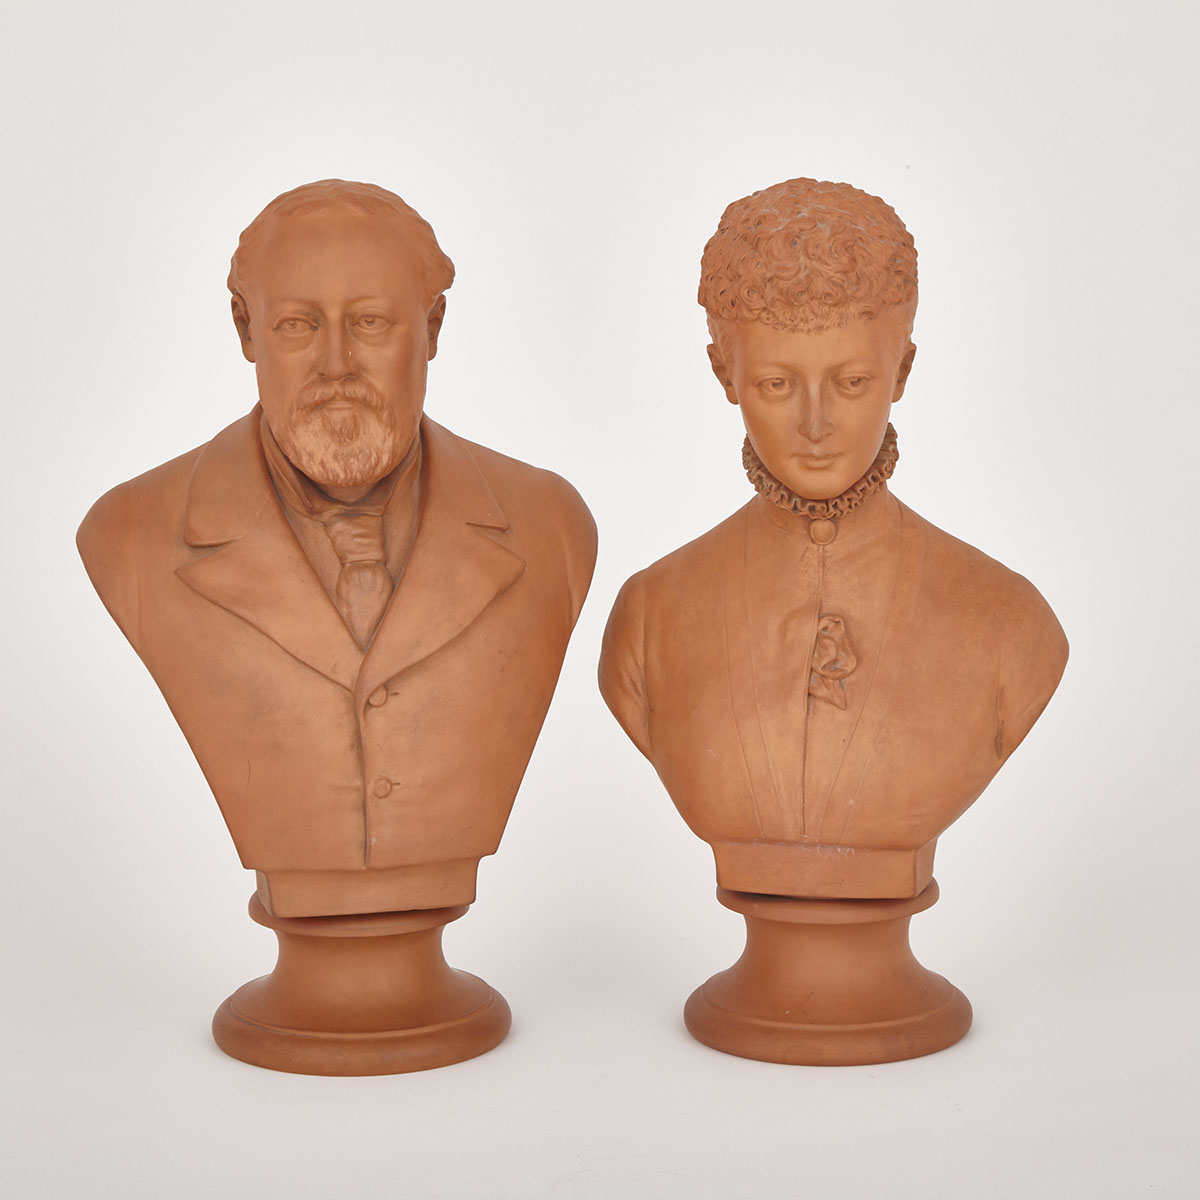 Pair of Terra Cotta Busts of King Edward VII and Queen Alexandra, late 19th century